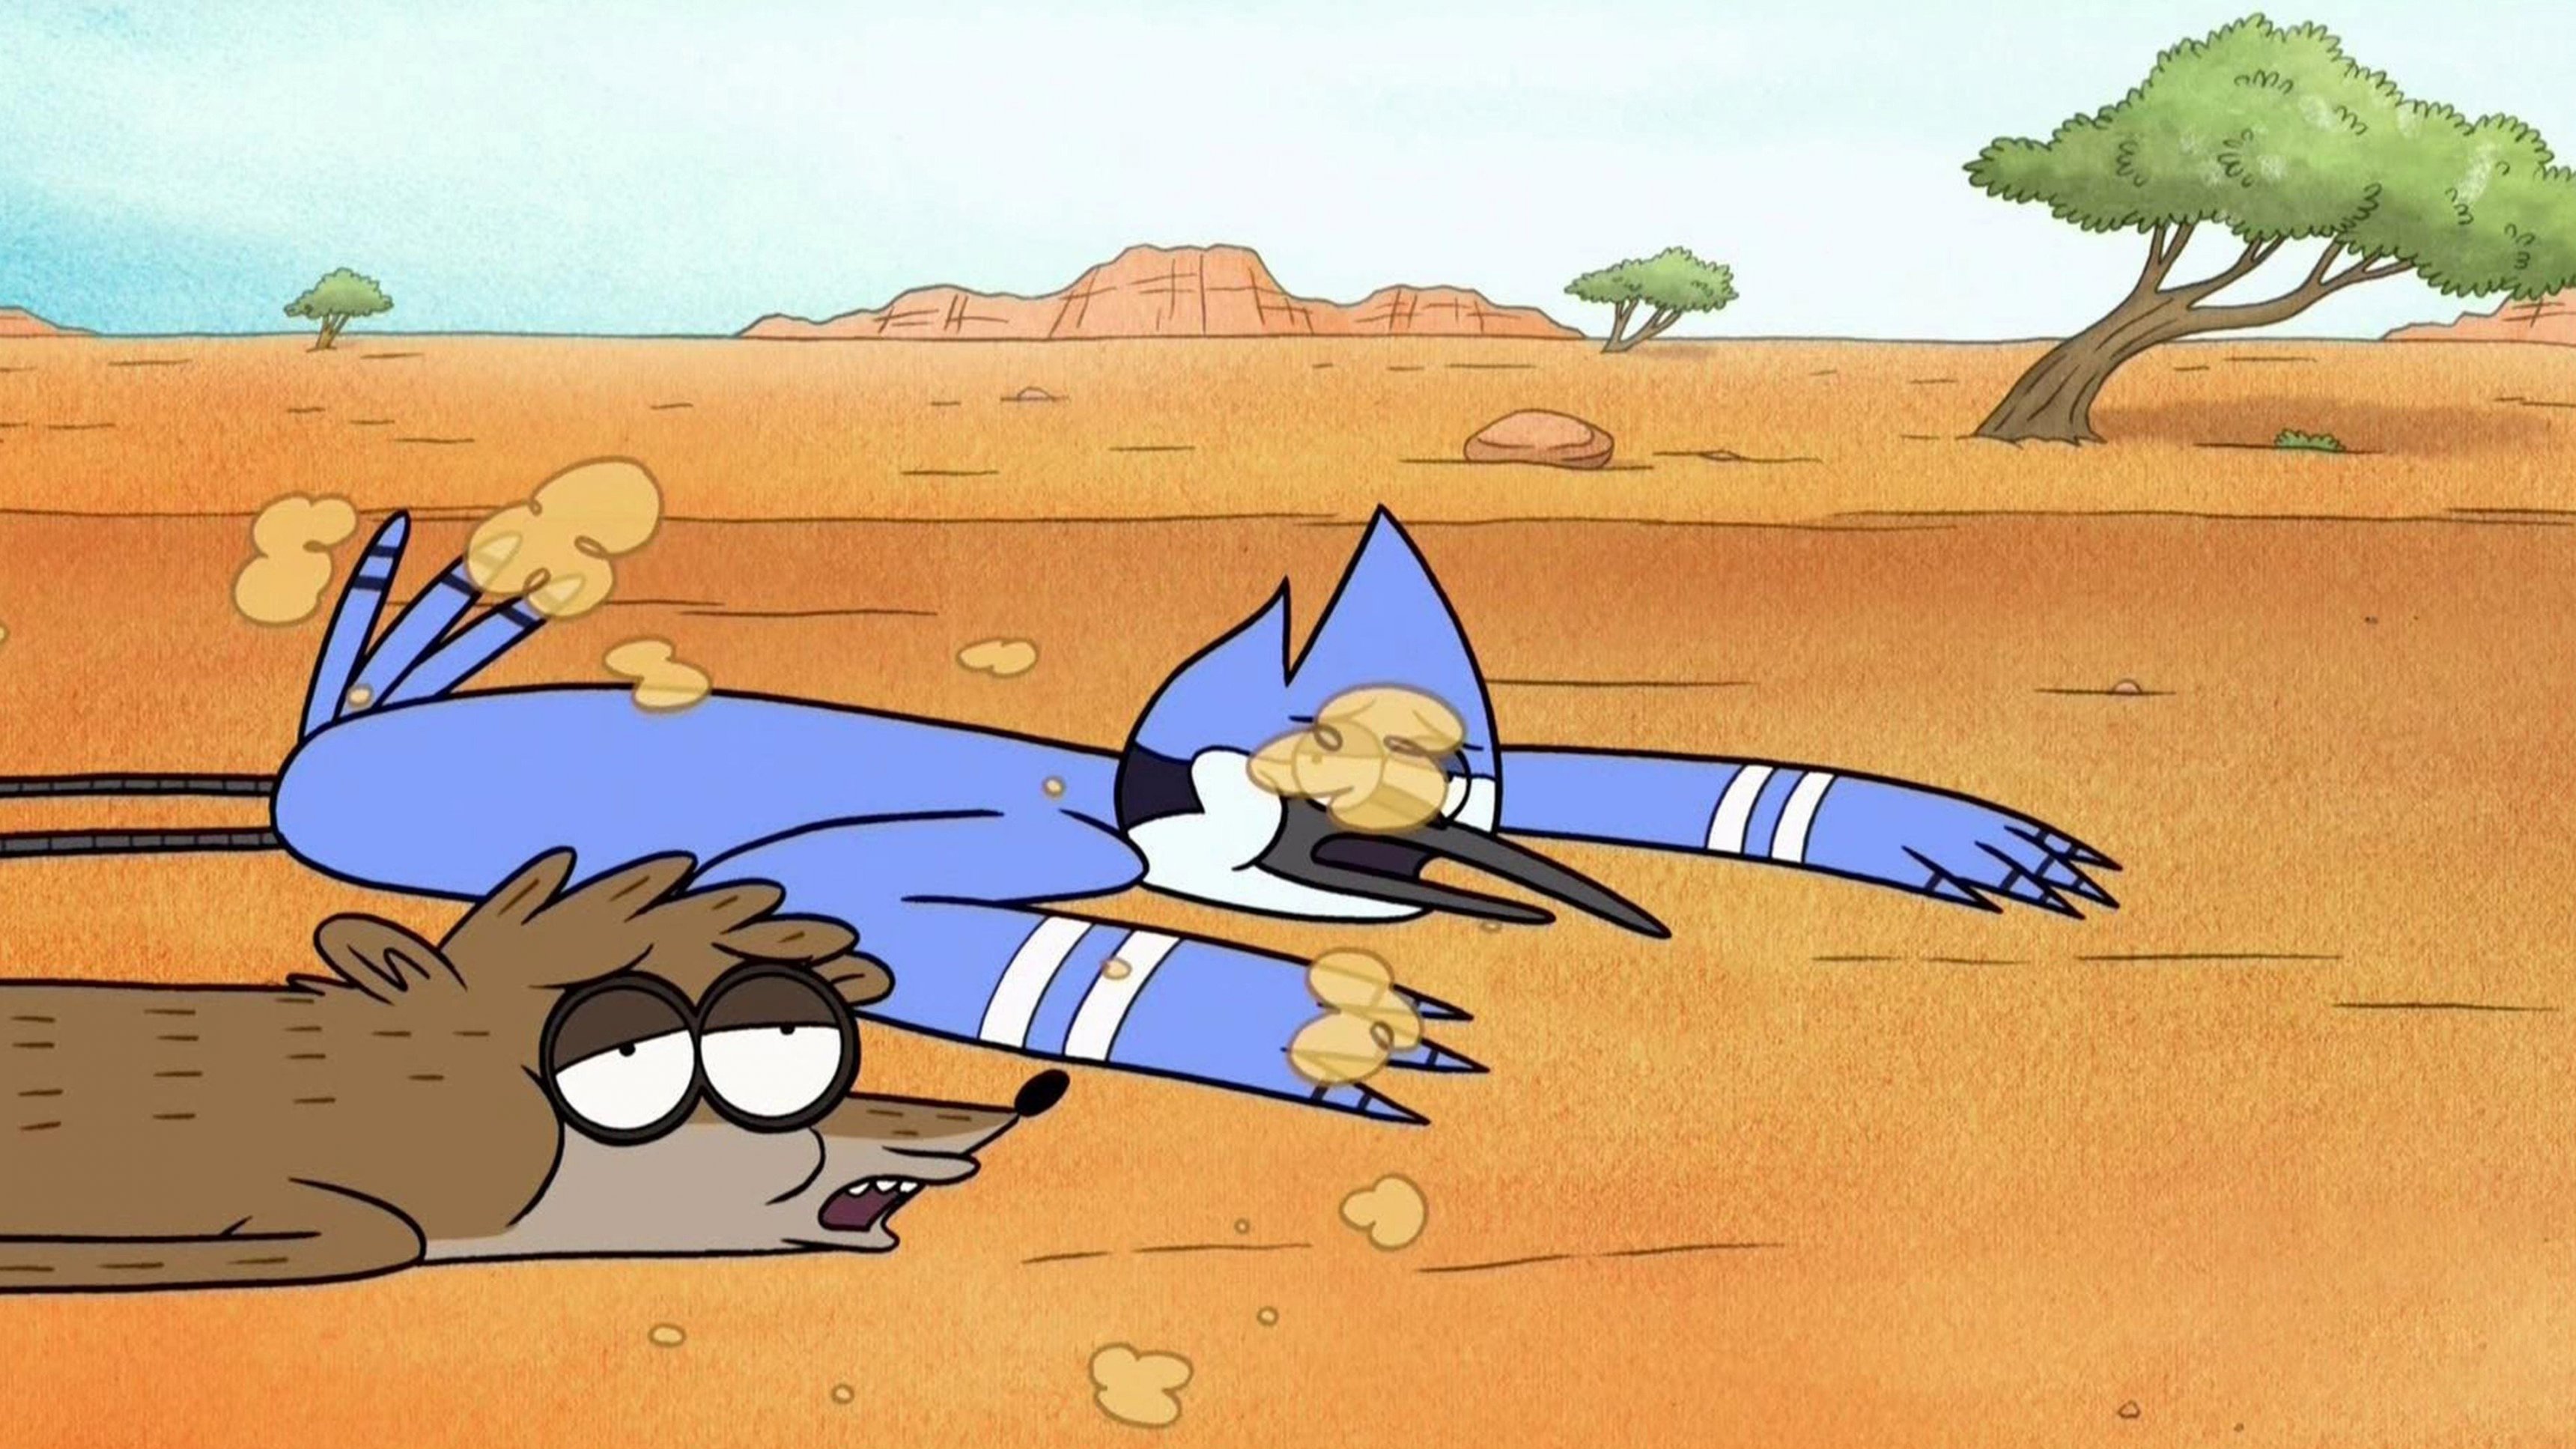 13. Mordecai and Rigby i Australien